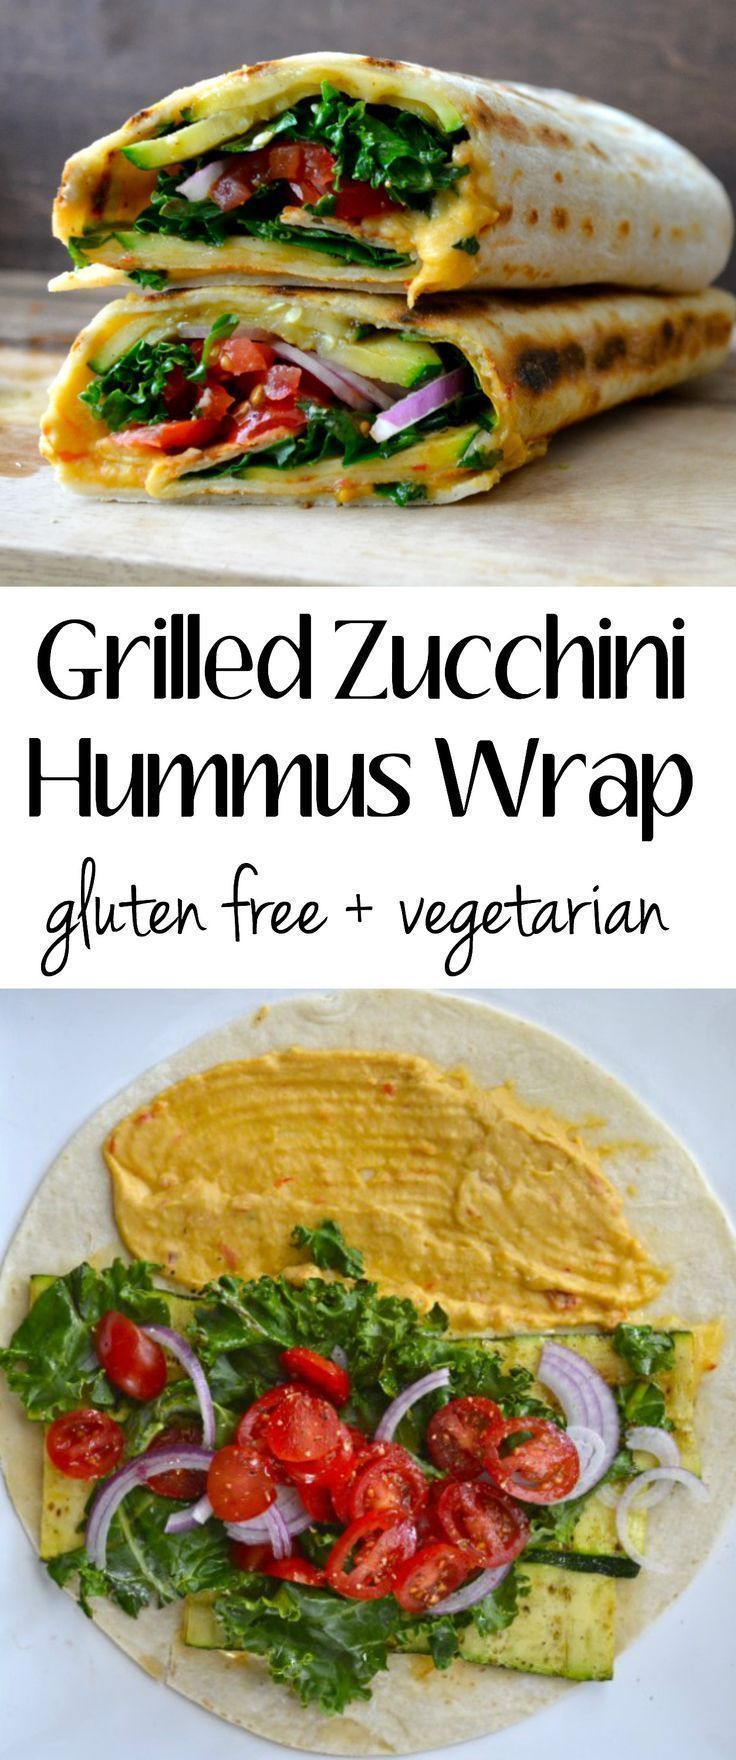 Fresh veggies are grilled to perfection and packed in this Grilled Zucchini Hummus Wrap! #diet_food_snacks